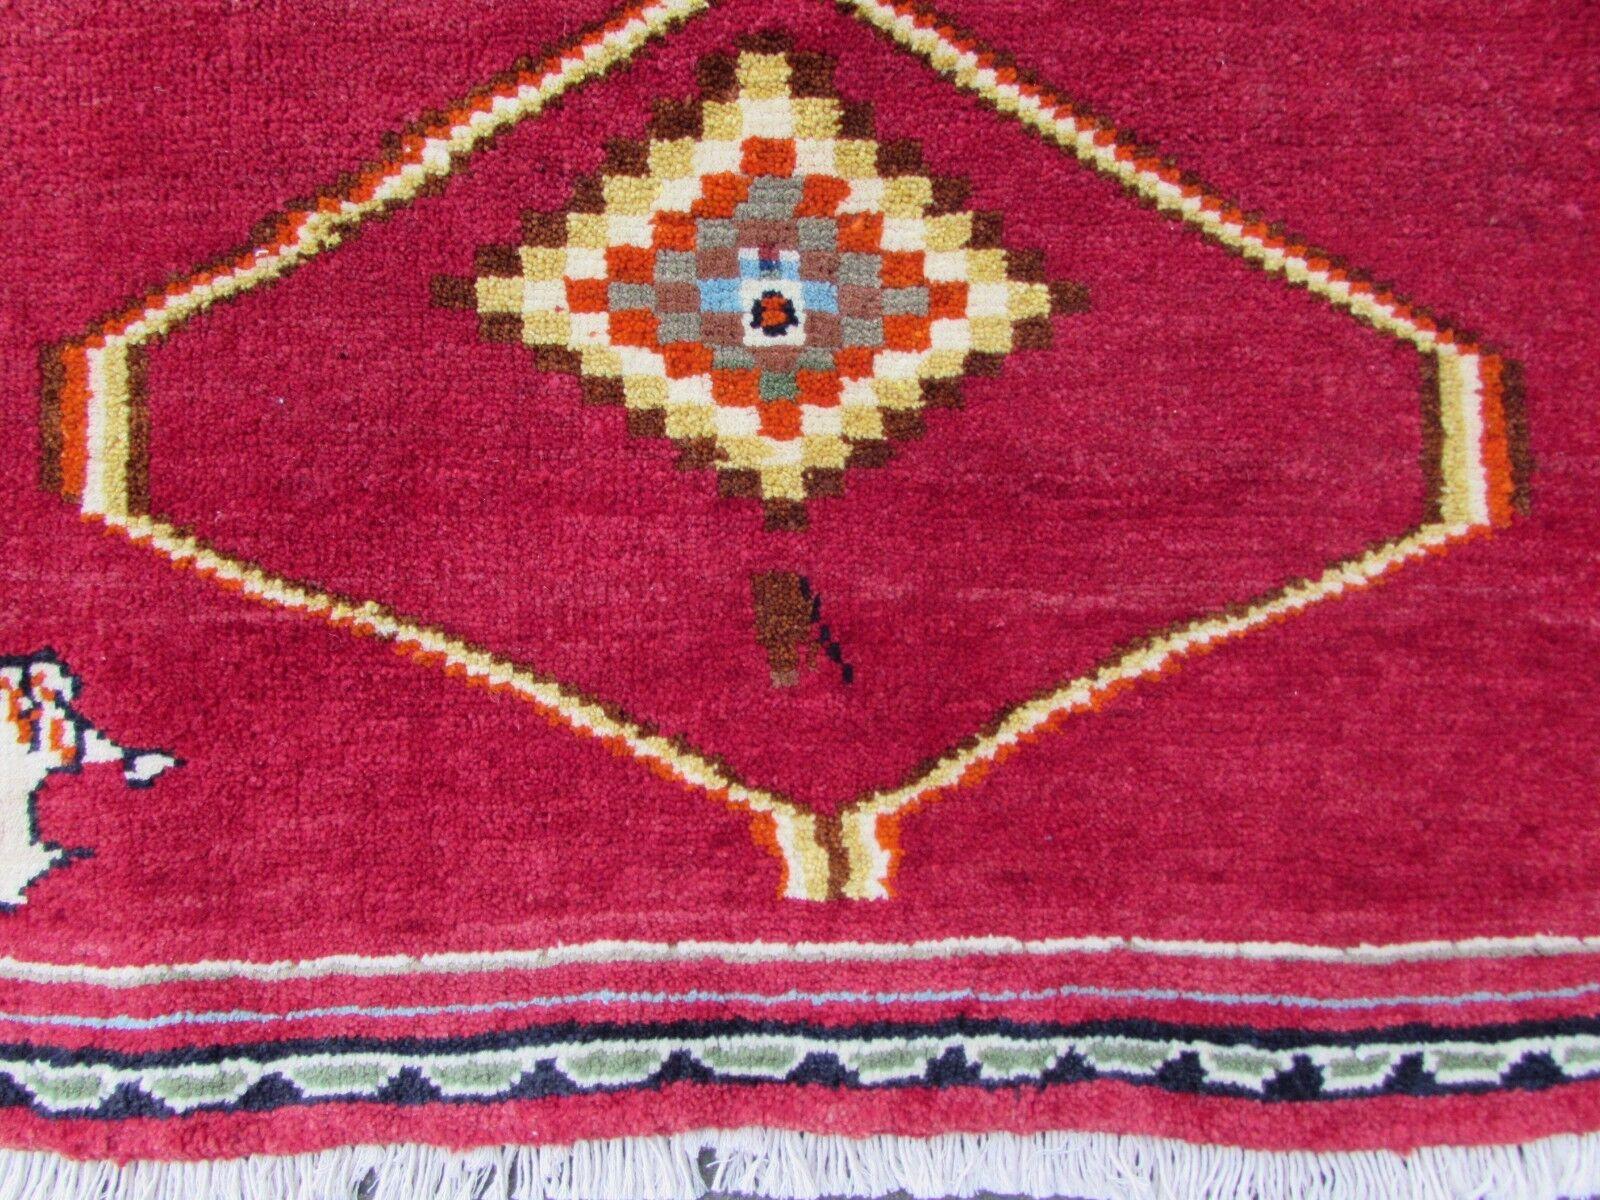 Handmade Vintage Persian Style Gabbeh Red Rug 4.1' x 5.3', 1970s, 1Q60 For Sale 4